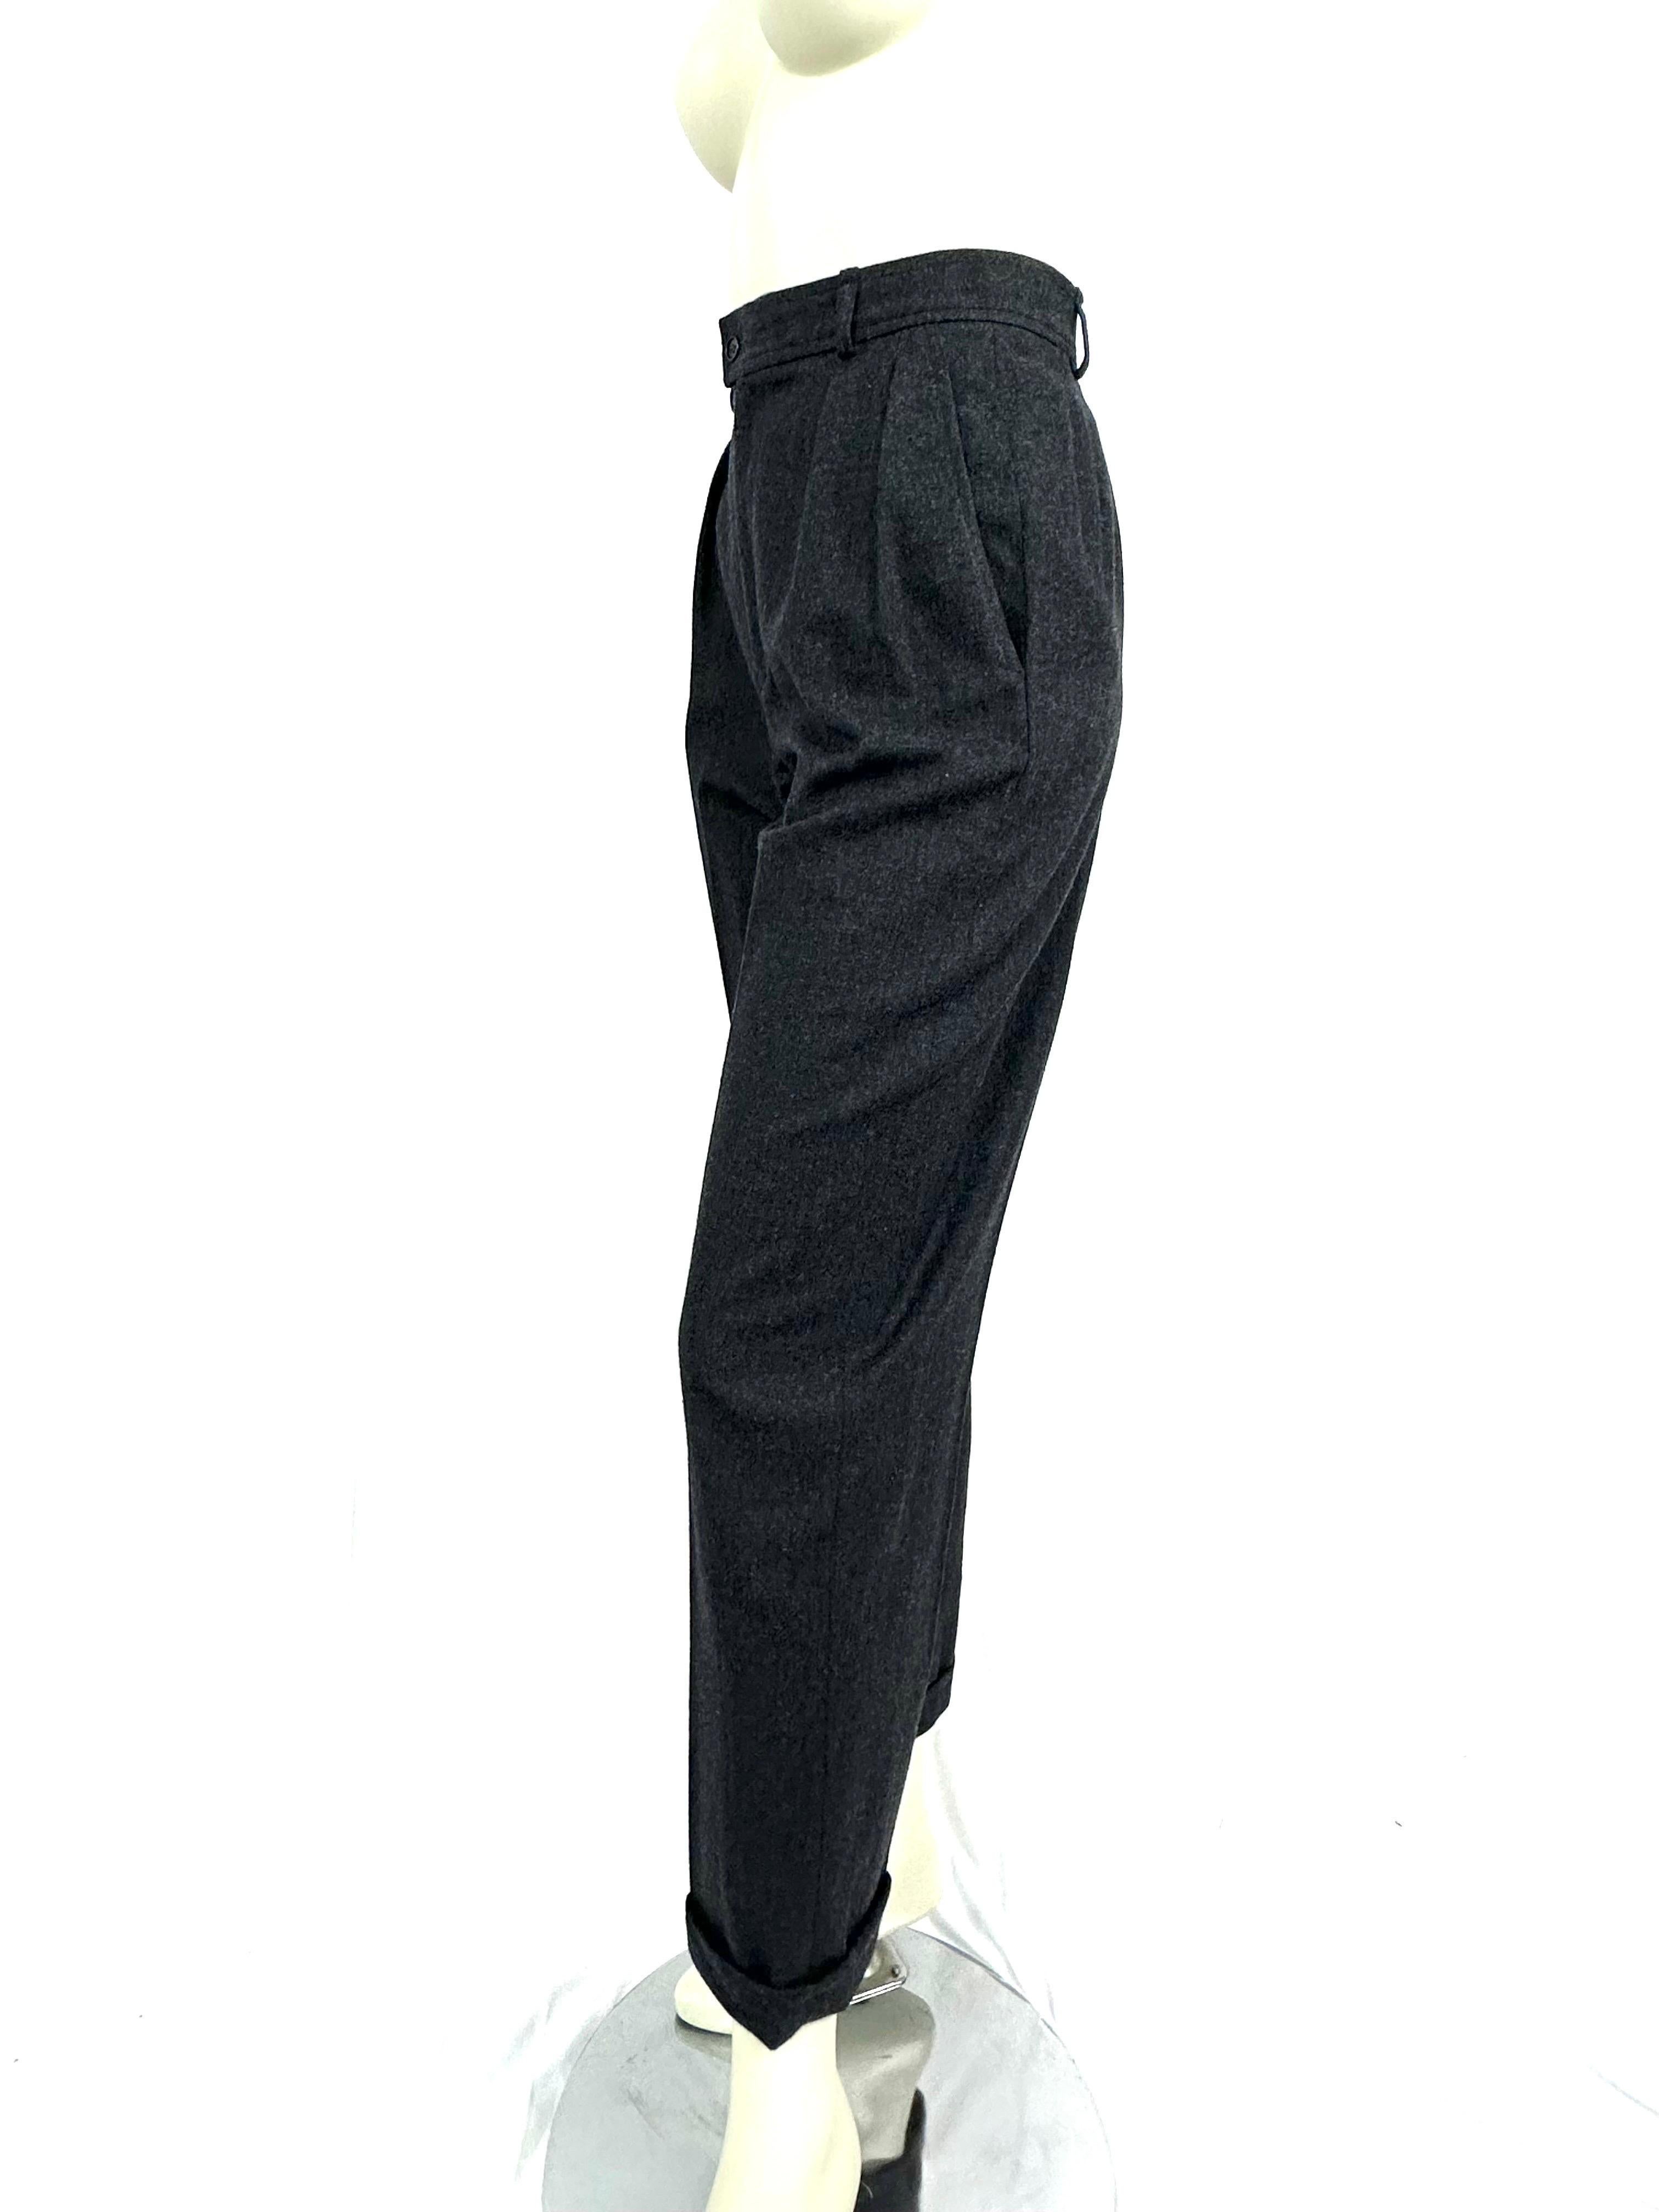 Women's Ysl vintage anthracite gray wool trousers from the 1990s